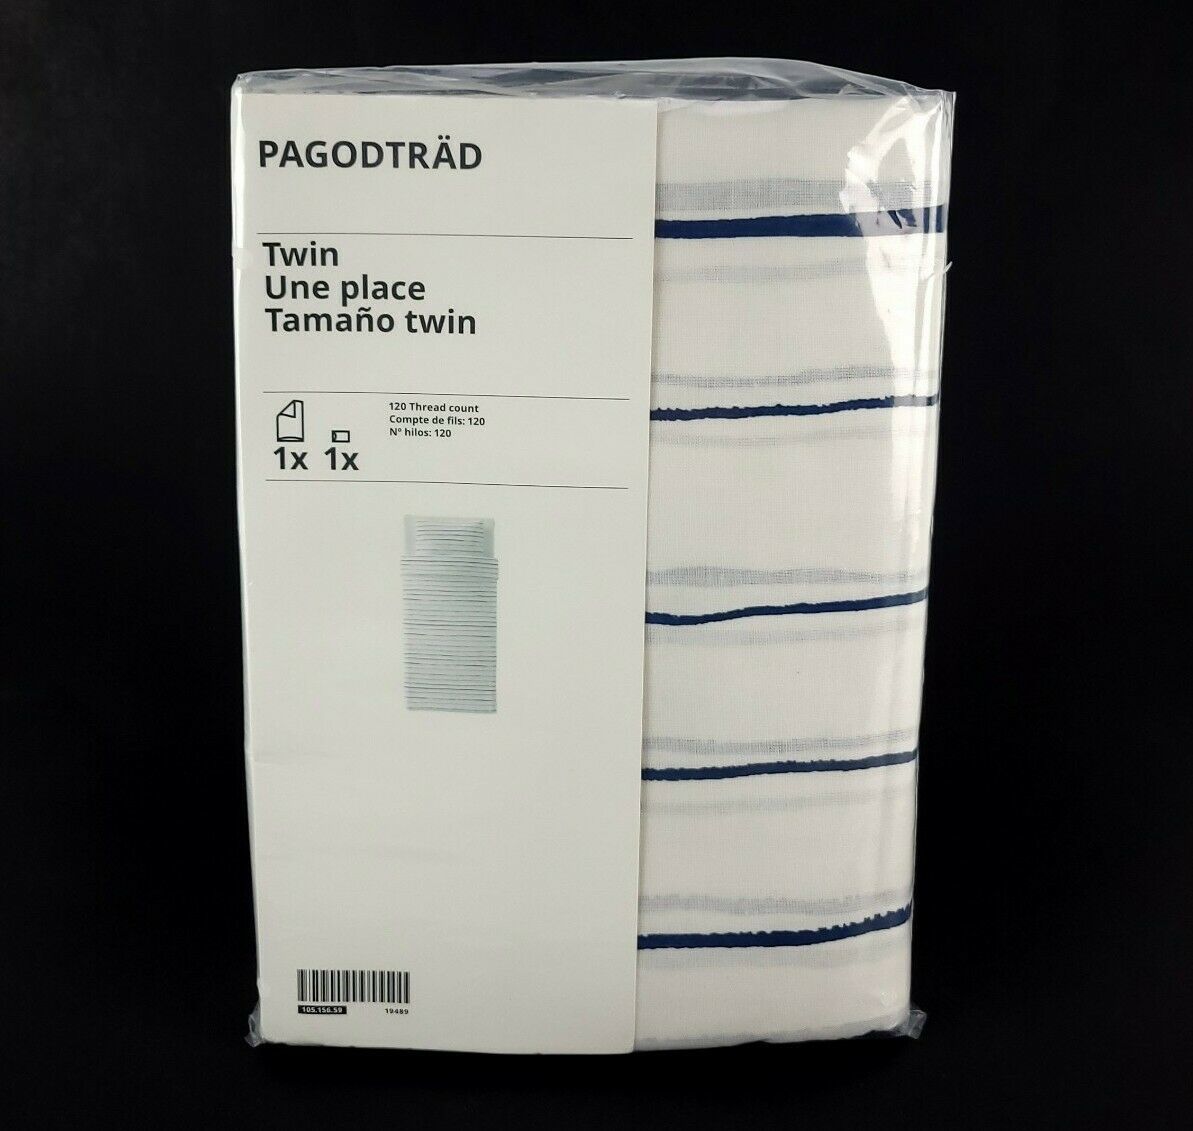 IKEA PAGODTRÄD Twin Duvet Cover & Pillowcase White Blue Stipes Pagodtrad New - $28.49